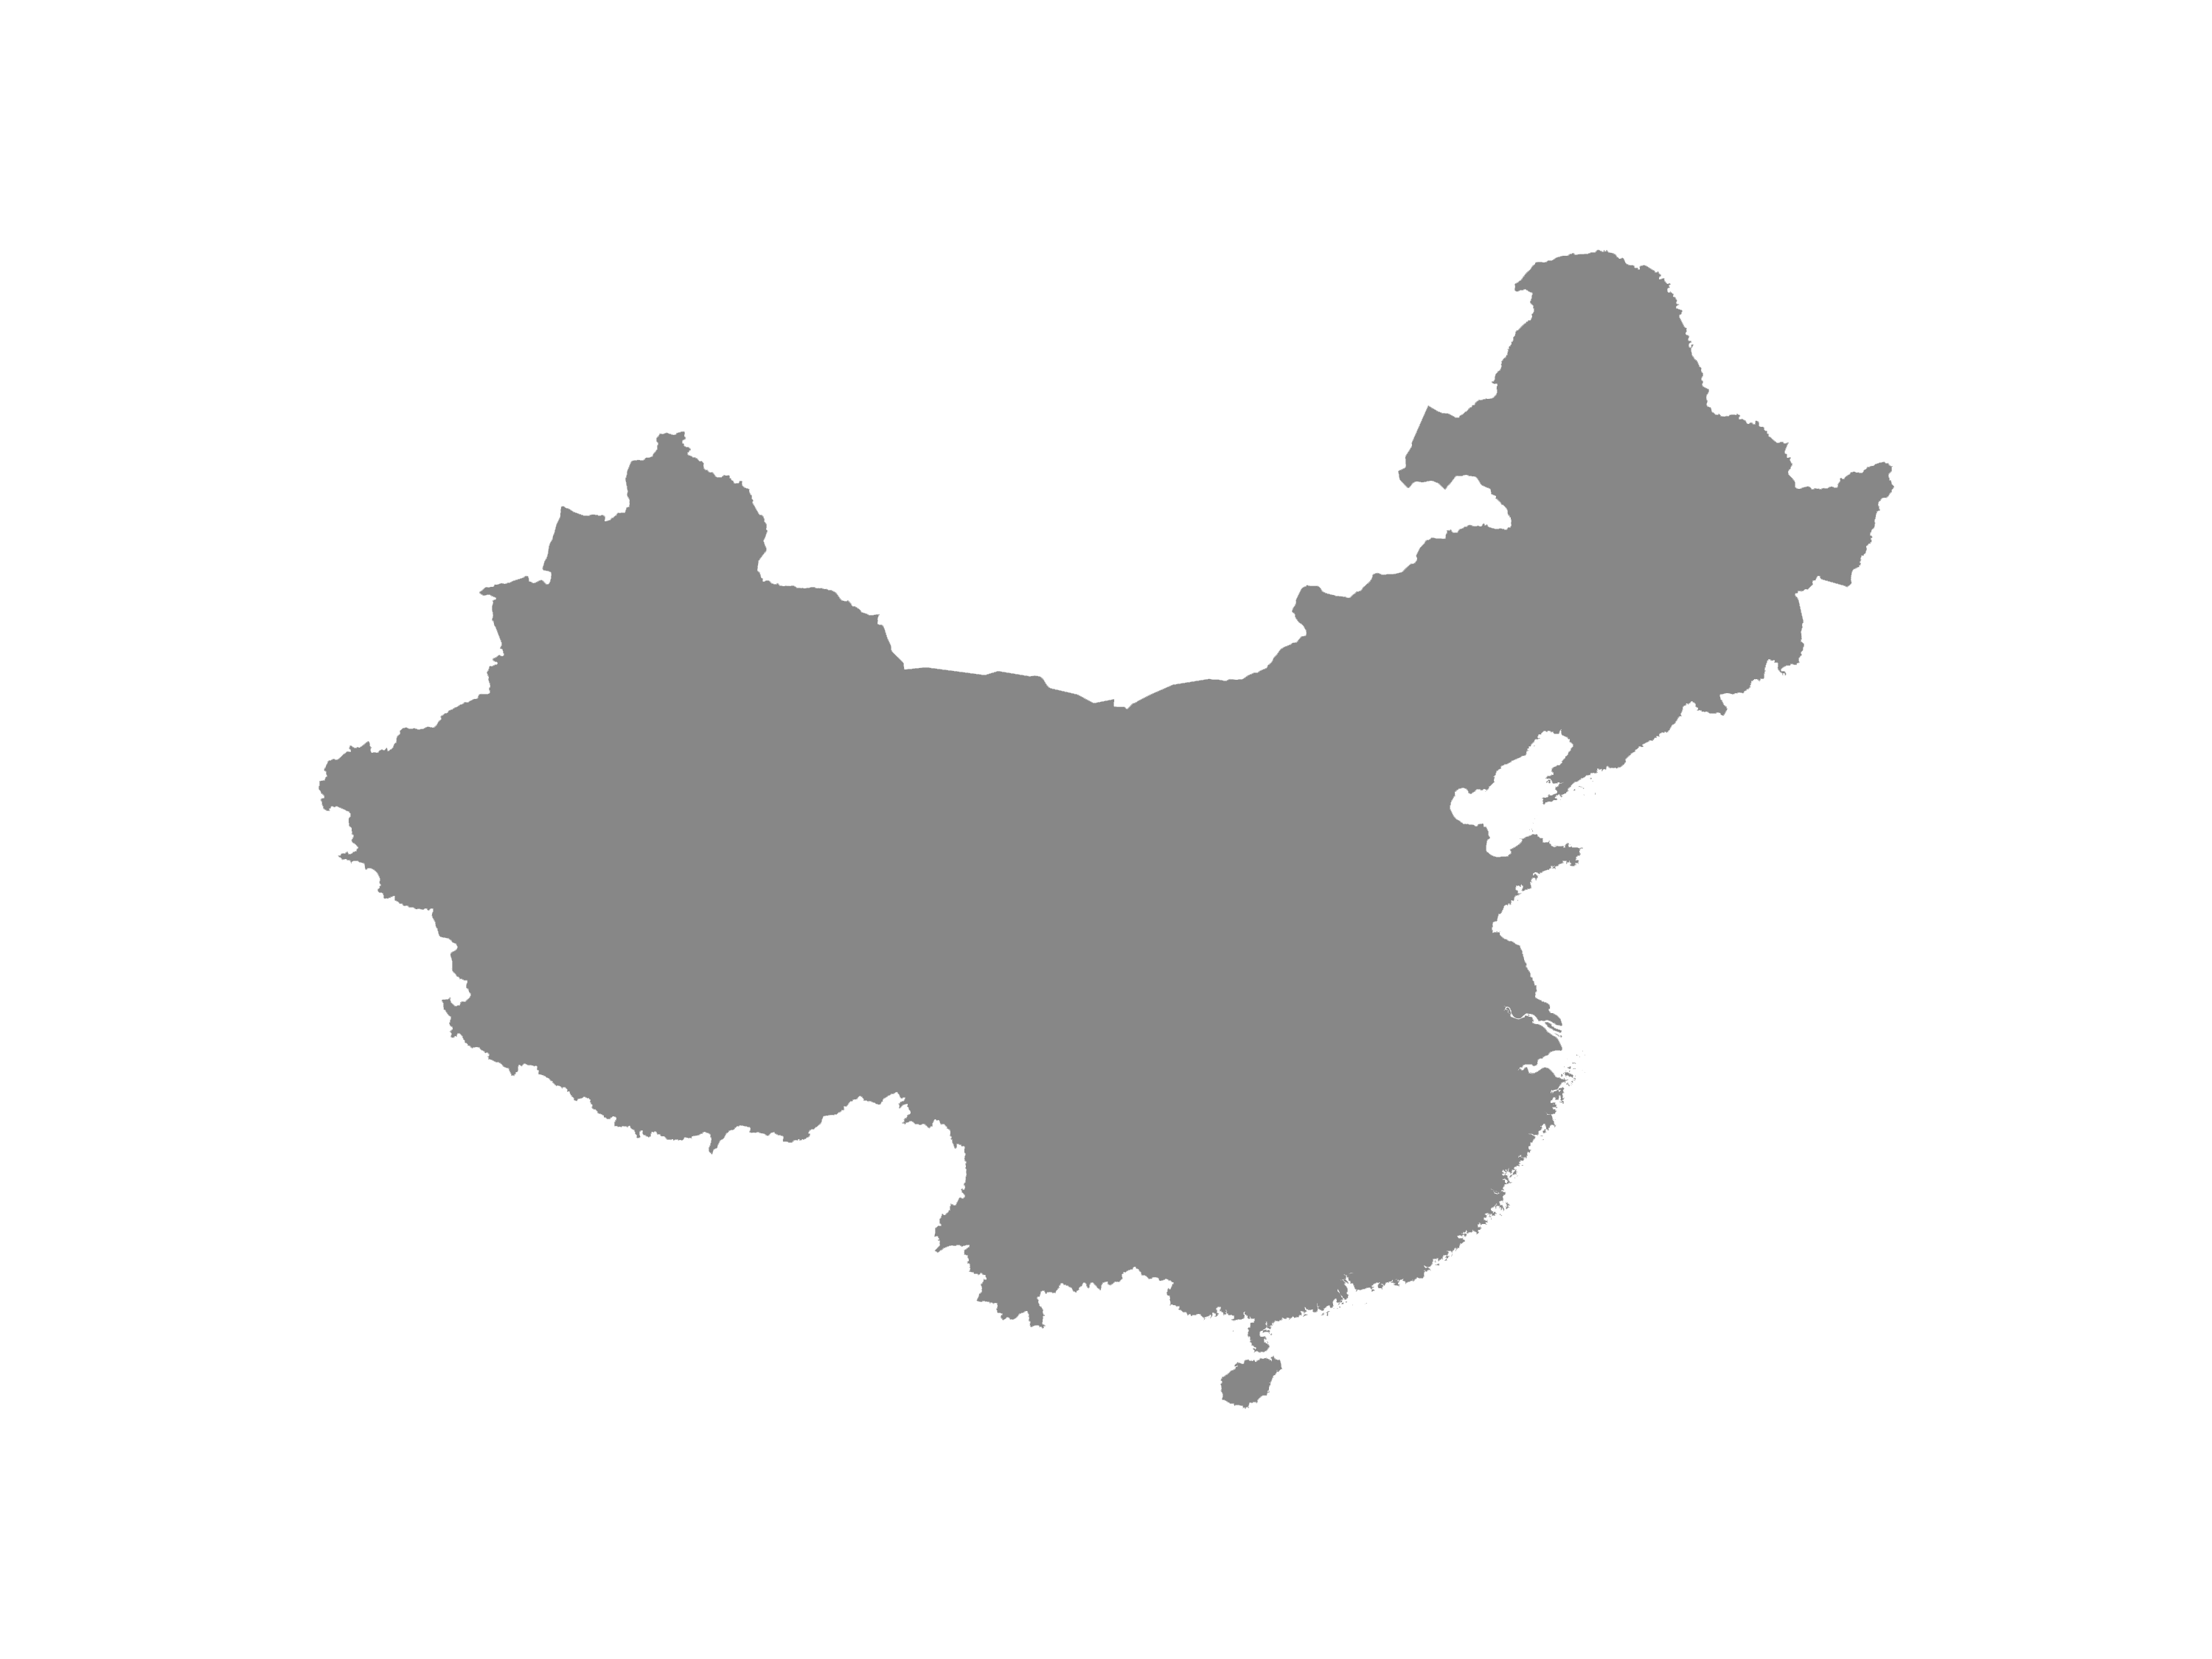 China - Single Color by FreeVectorMaps.com